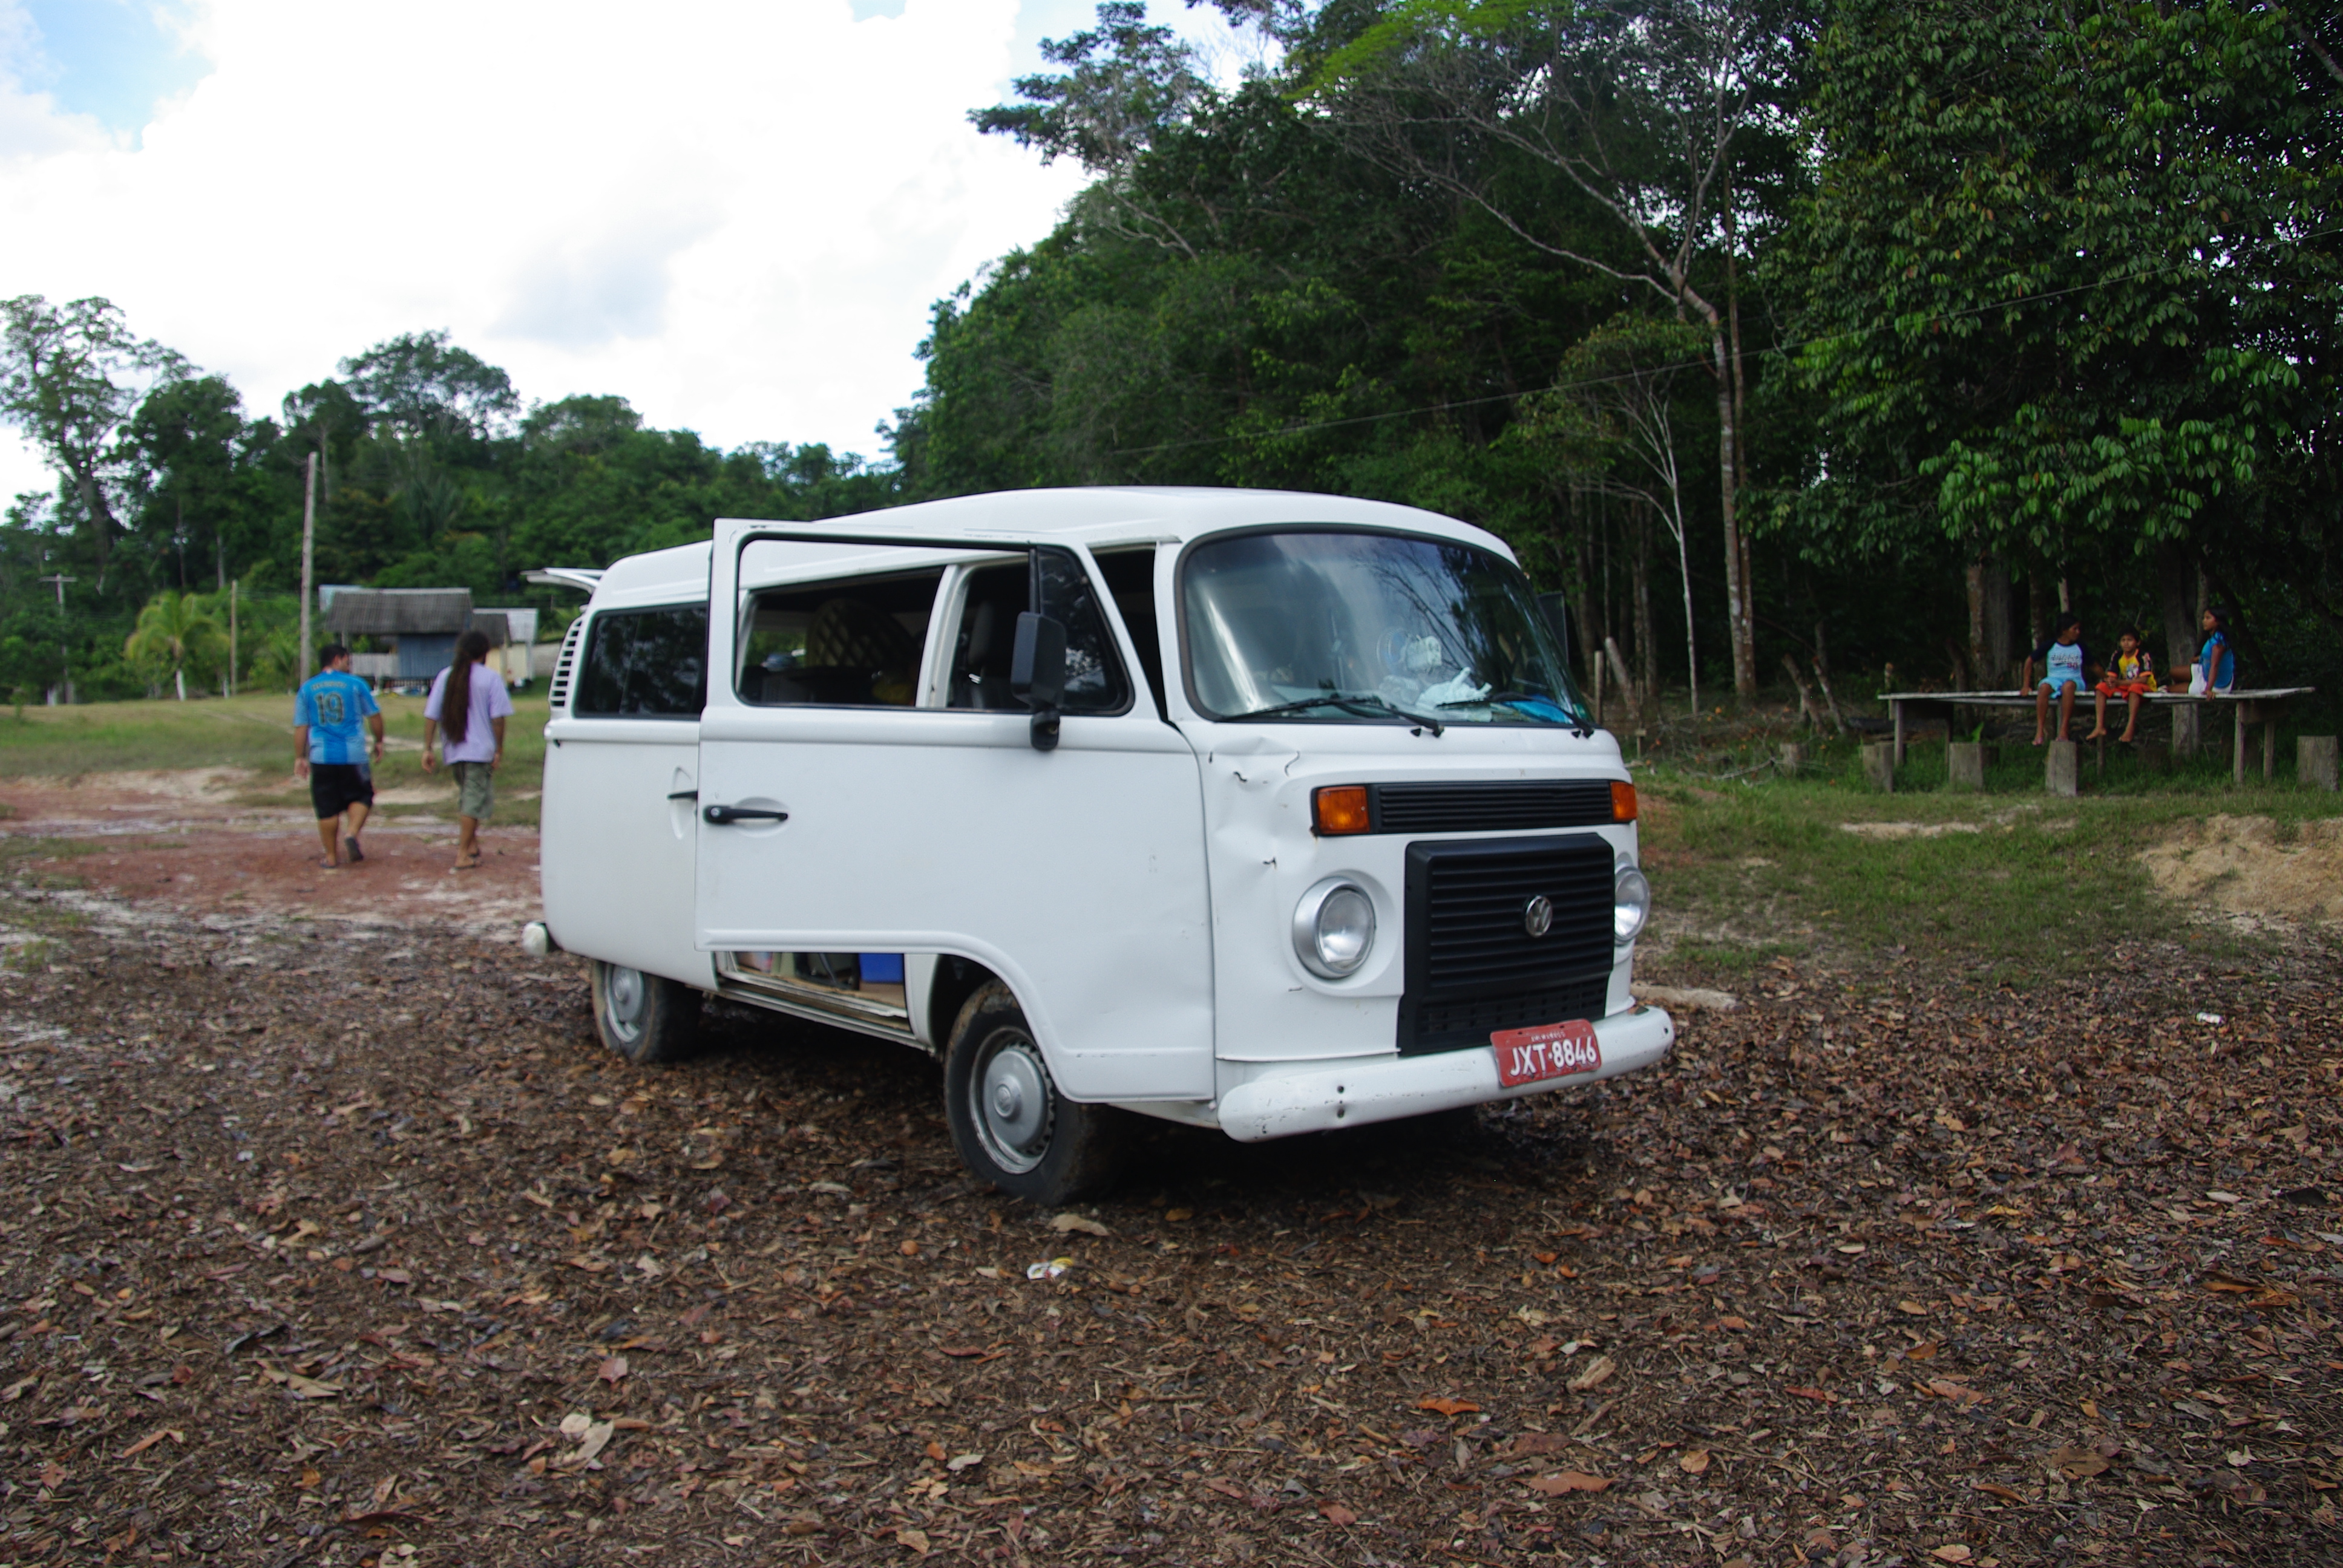 Party wagon? Not quite, but it got us to Presidente Figuereido